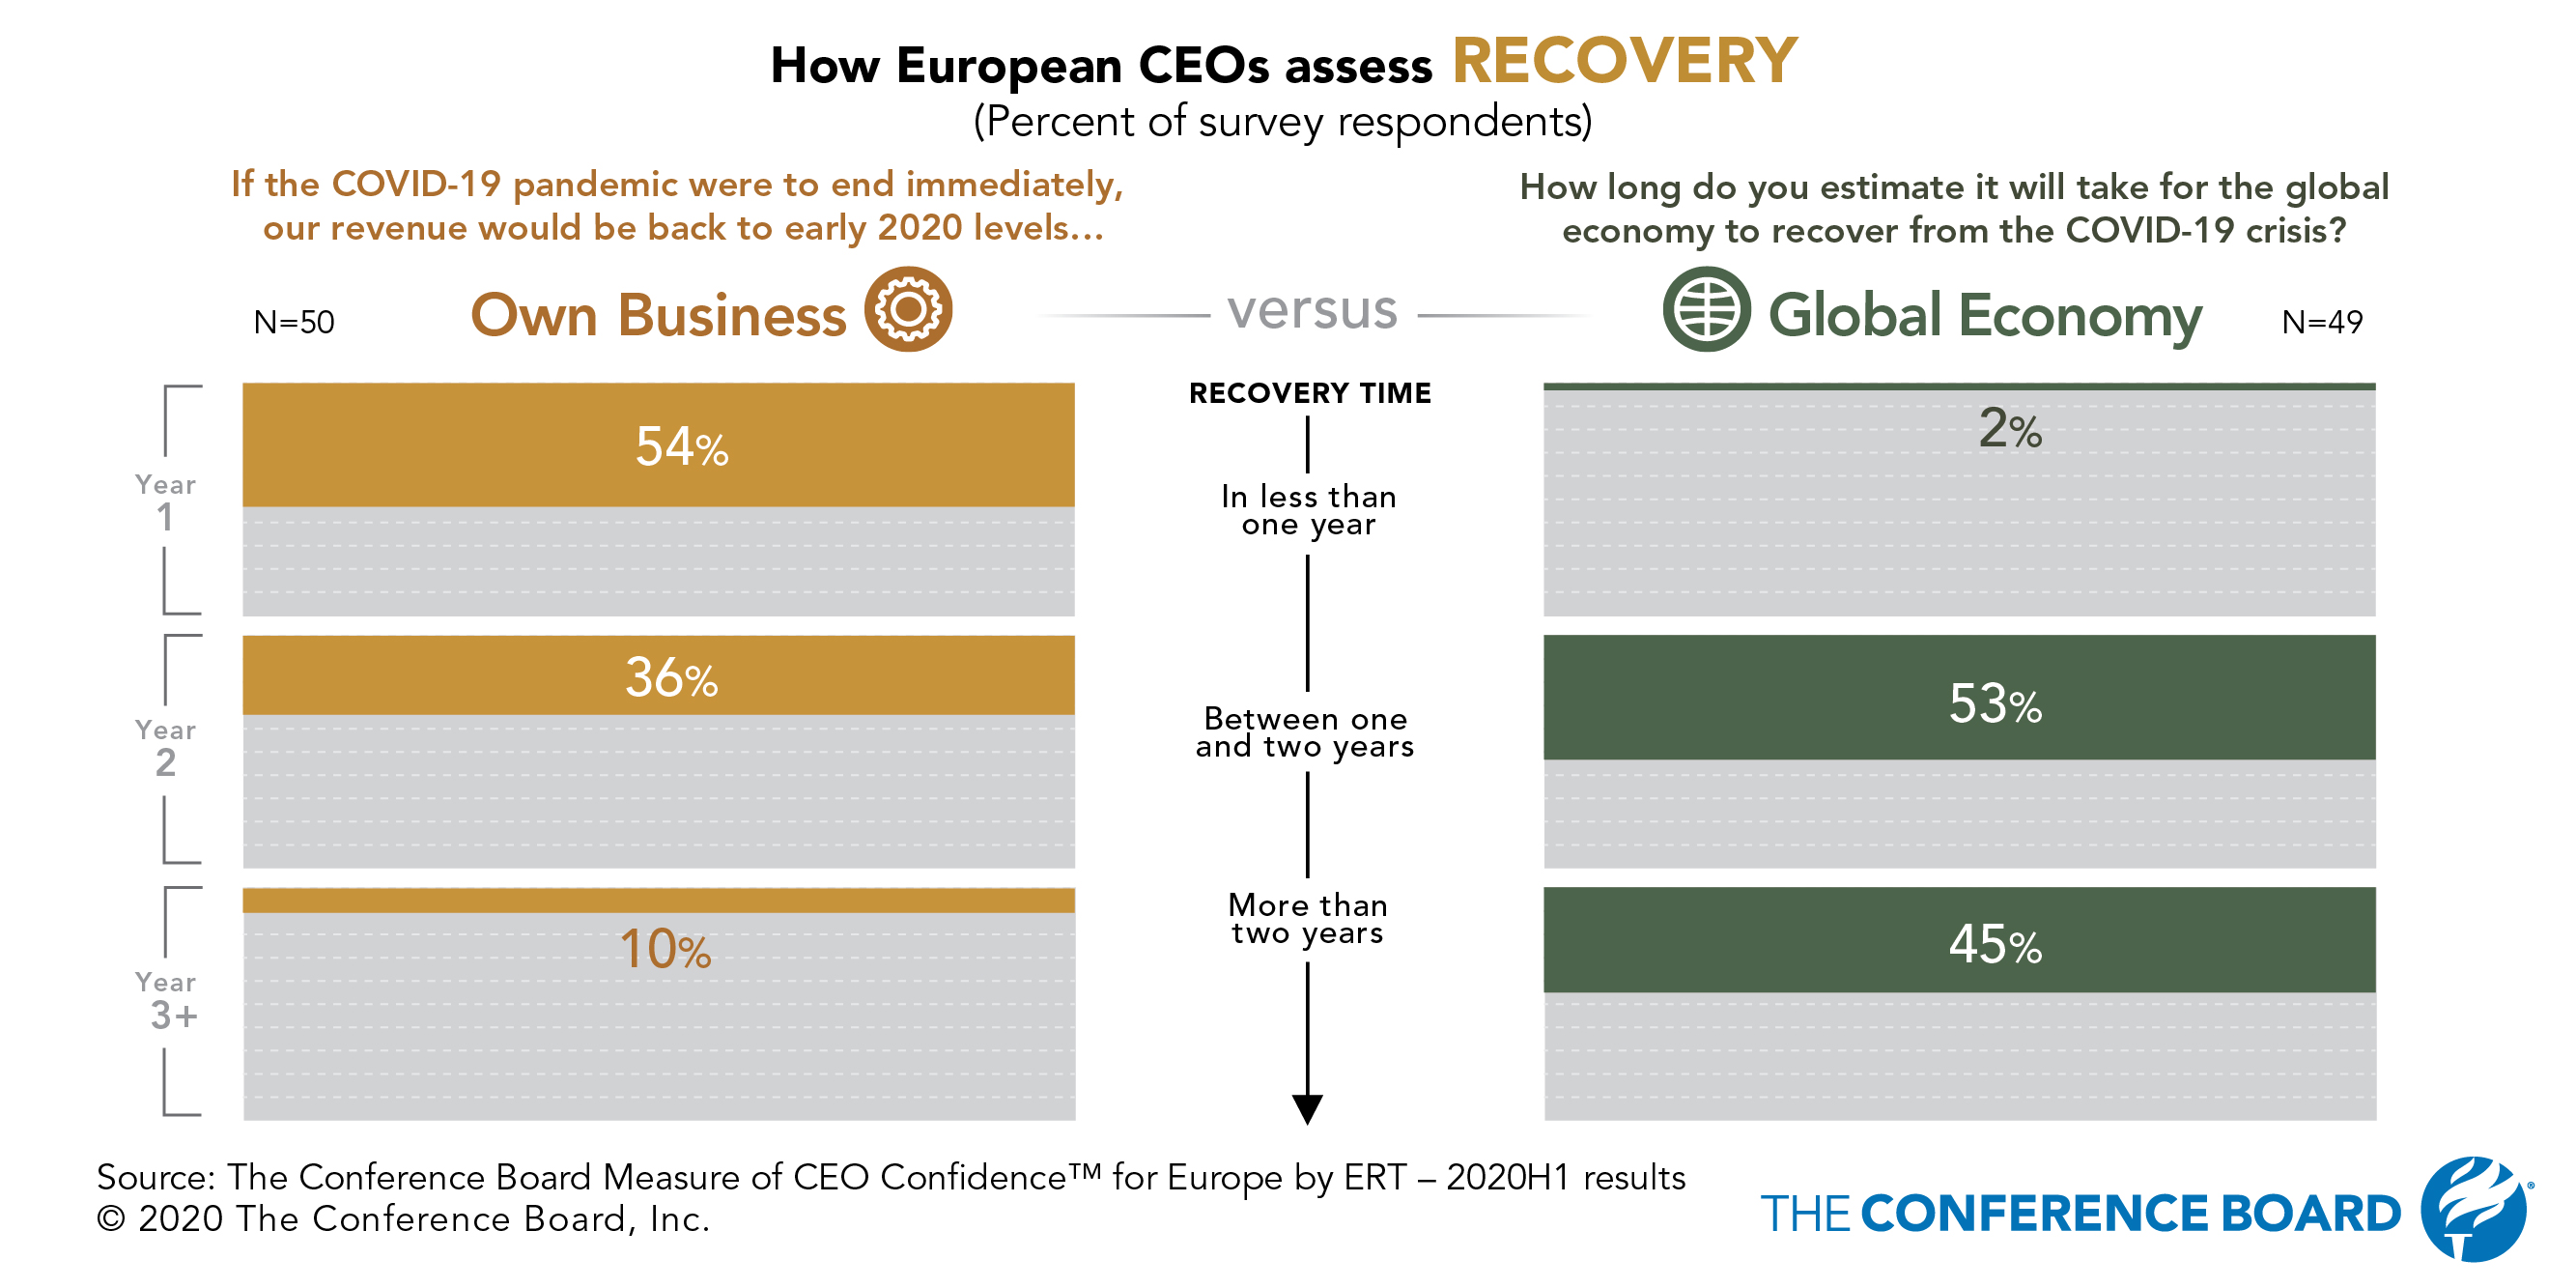 Economic recovery after COVID-19: Will large companies in Europe fare better than the global economy?